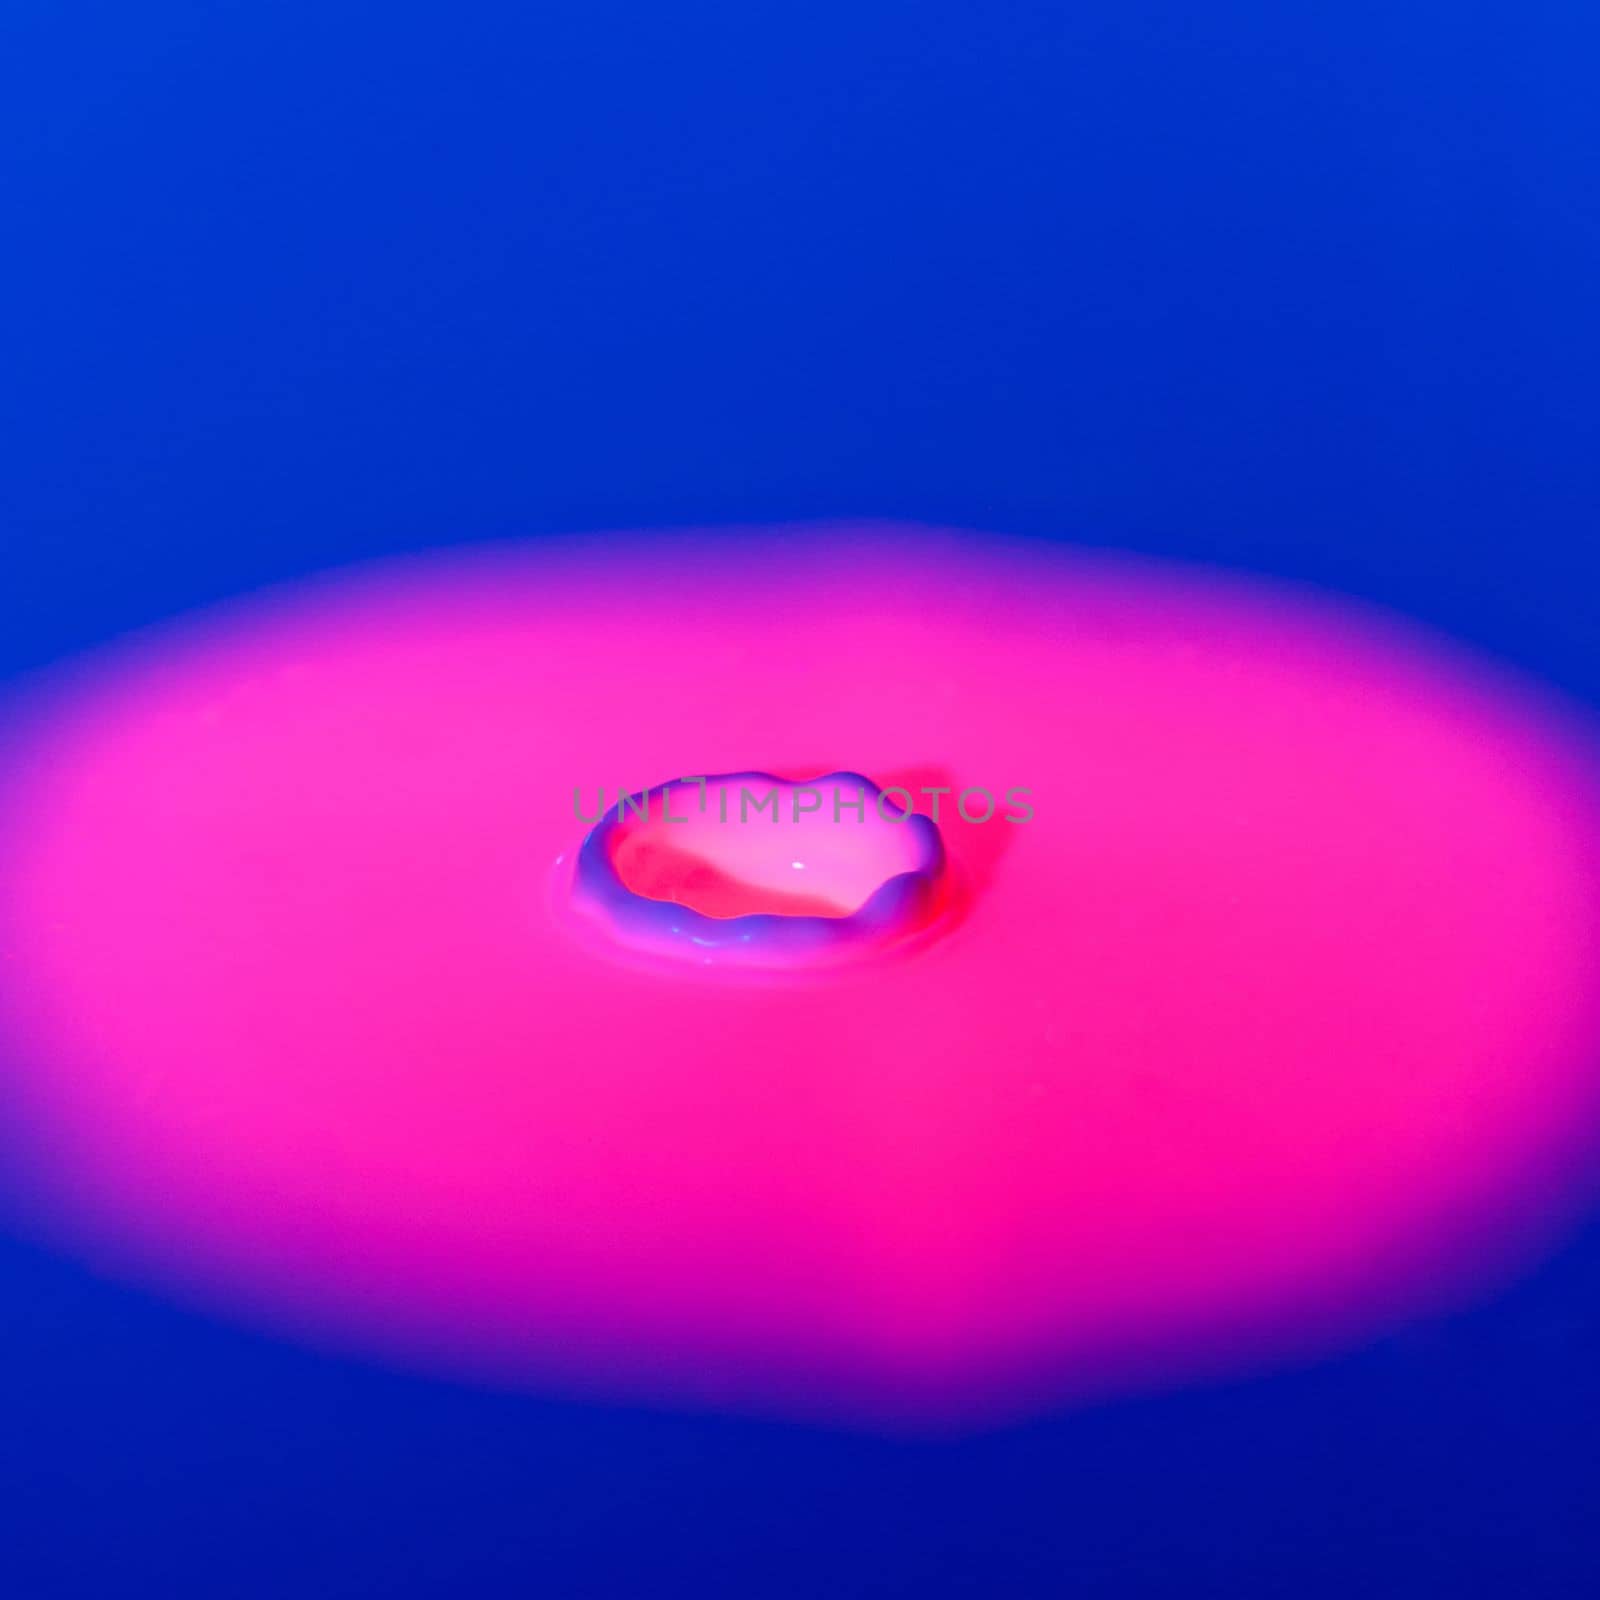 A drop falls into a thick liquid with a blue-pink background. Abstract colorful background. by Yurich32